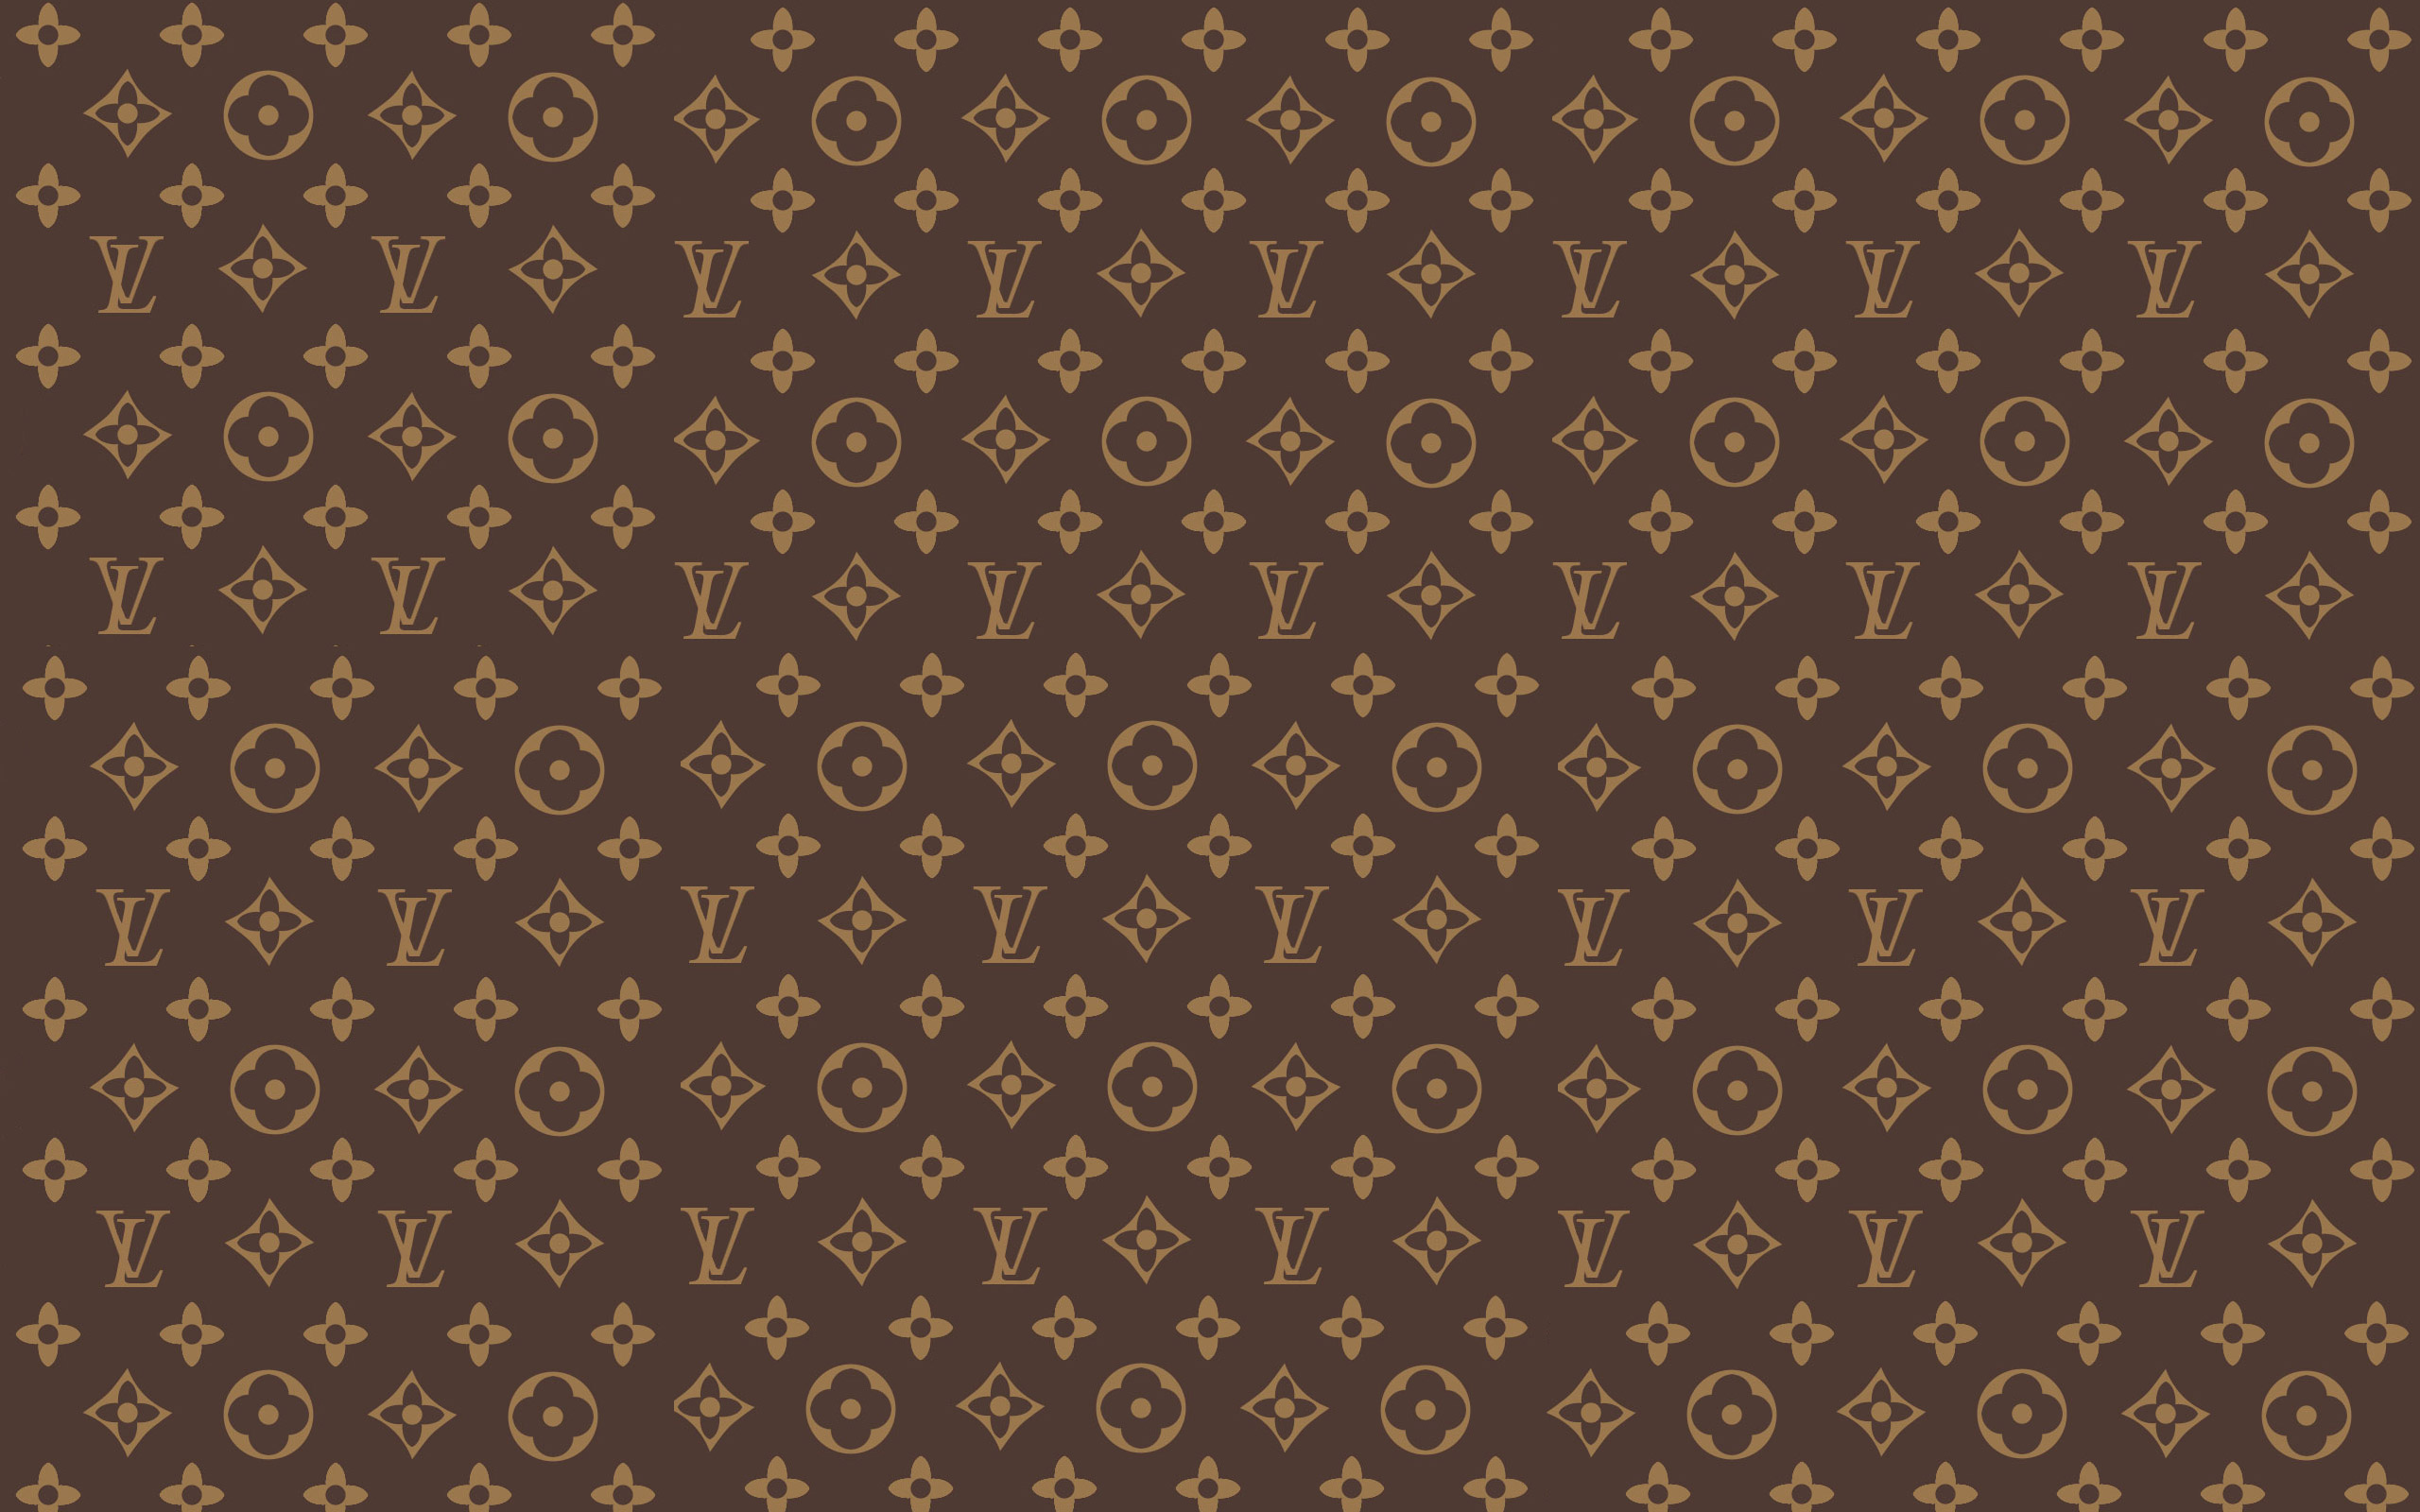 Products Louis Vuitton 2560x1600